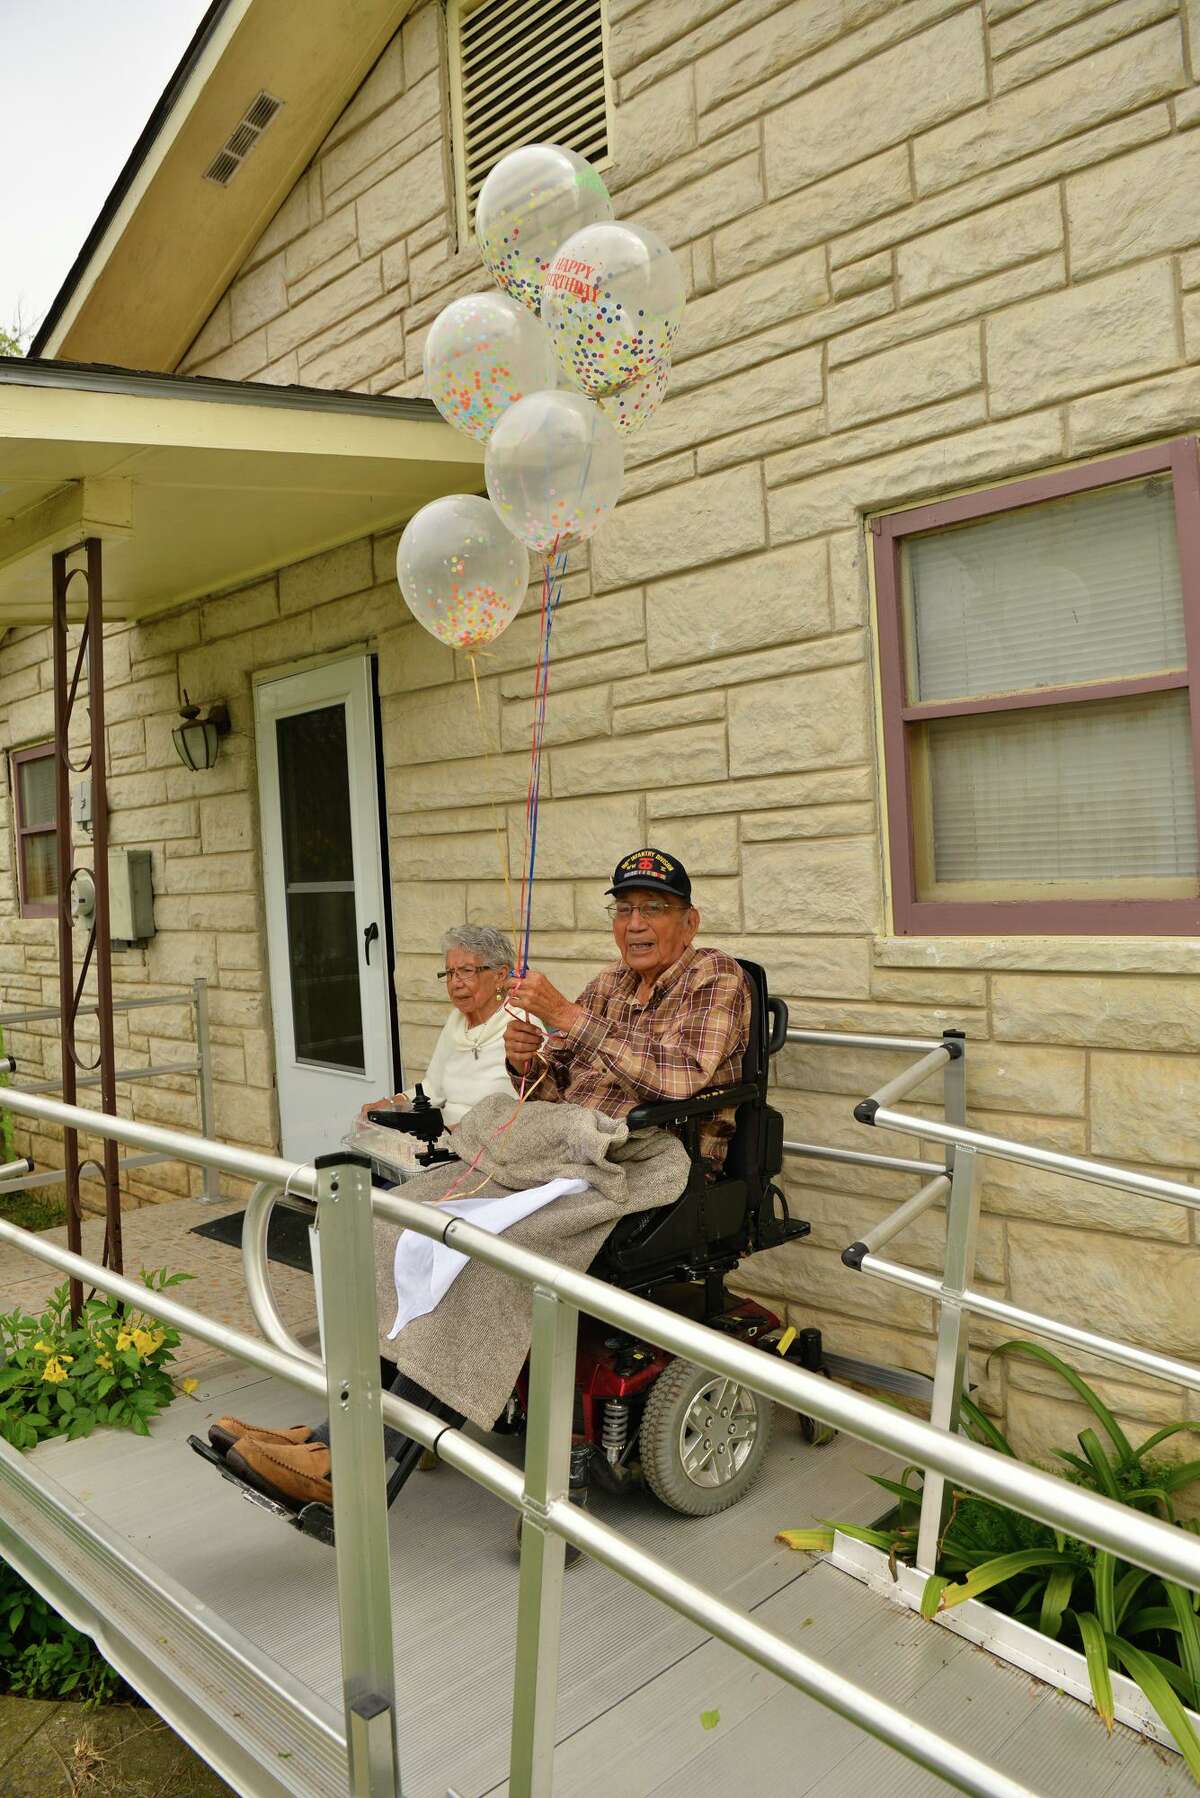 Celestino Rodriguez, 95, and his wife Stella 91, celebrated their 67th wedding anniversary and well as his 95th birthday Sunday as family members caravaned to their home and sang to them.